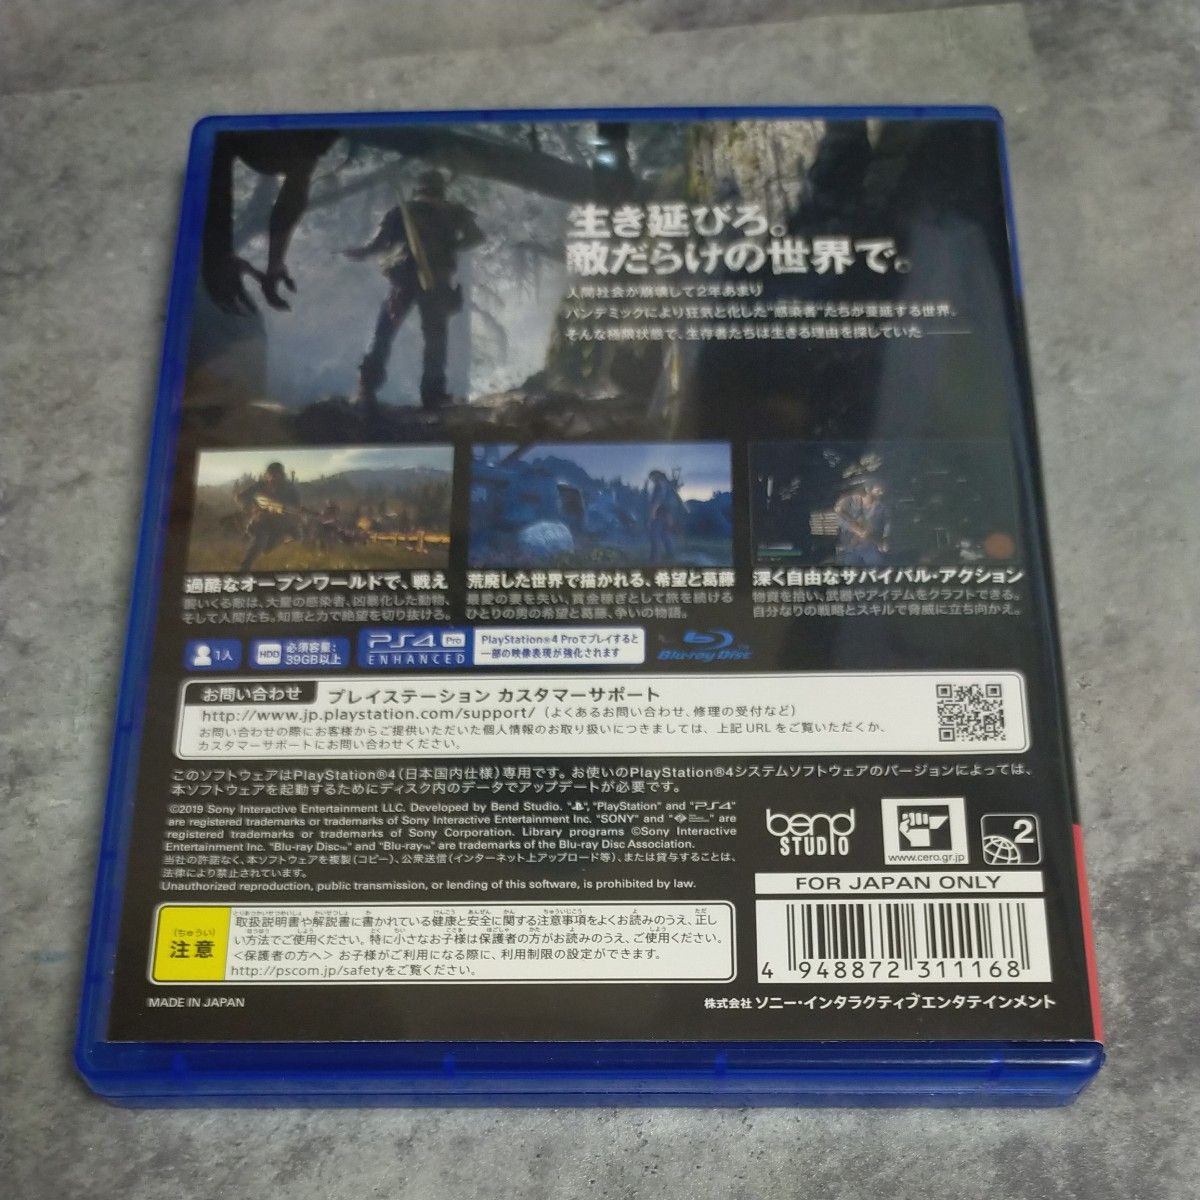 【PS4】 Days Gone [通常版］ デイズゴーン